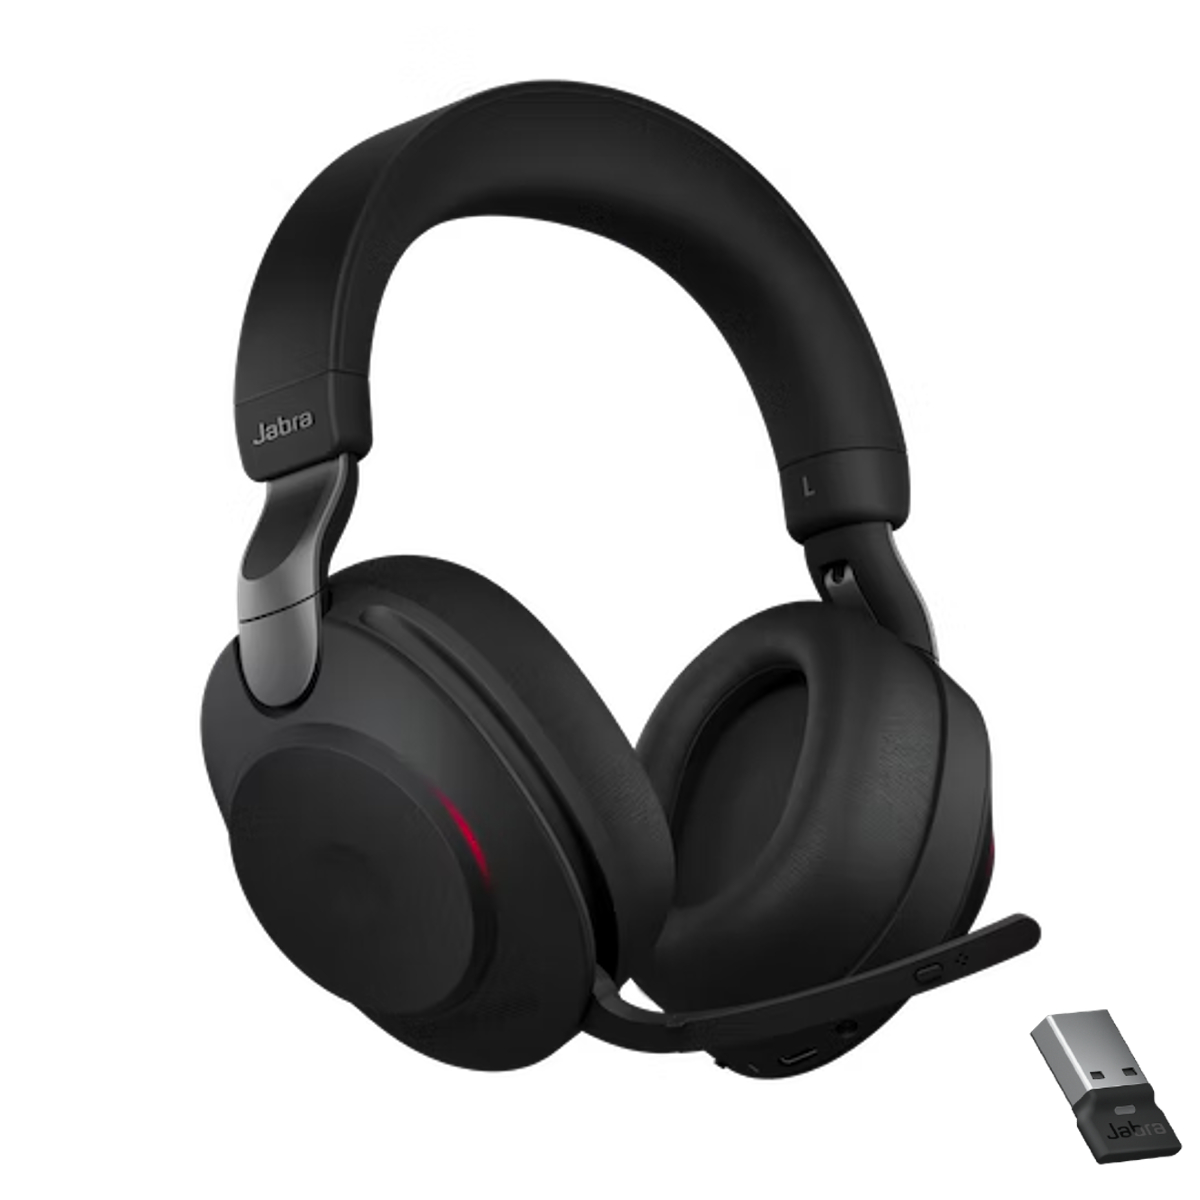 85 USB-A Stereo Adapter Macondo Headset Bluetooth | With Link Jabra UC | Evolve2 Networks 380A |Black (28599-989-999)